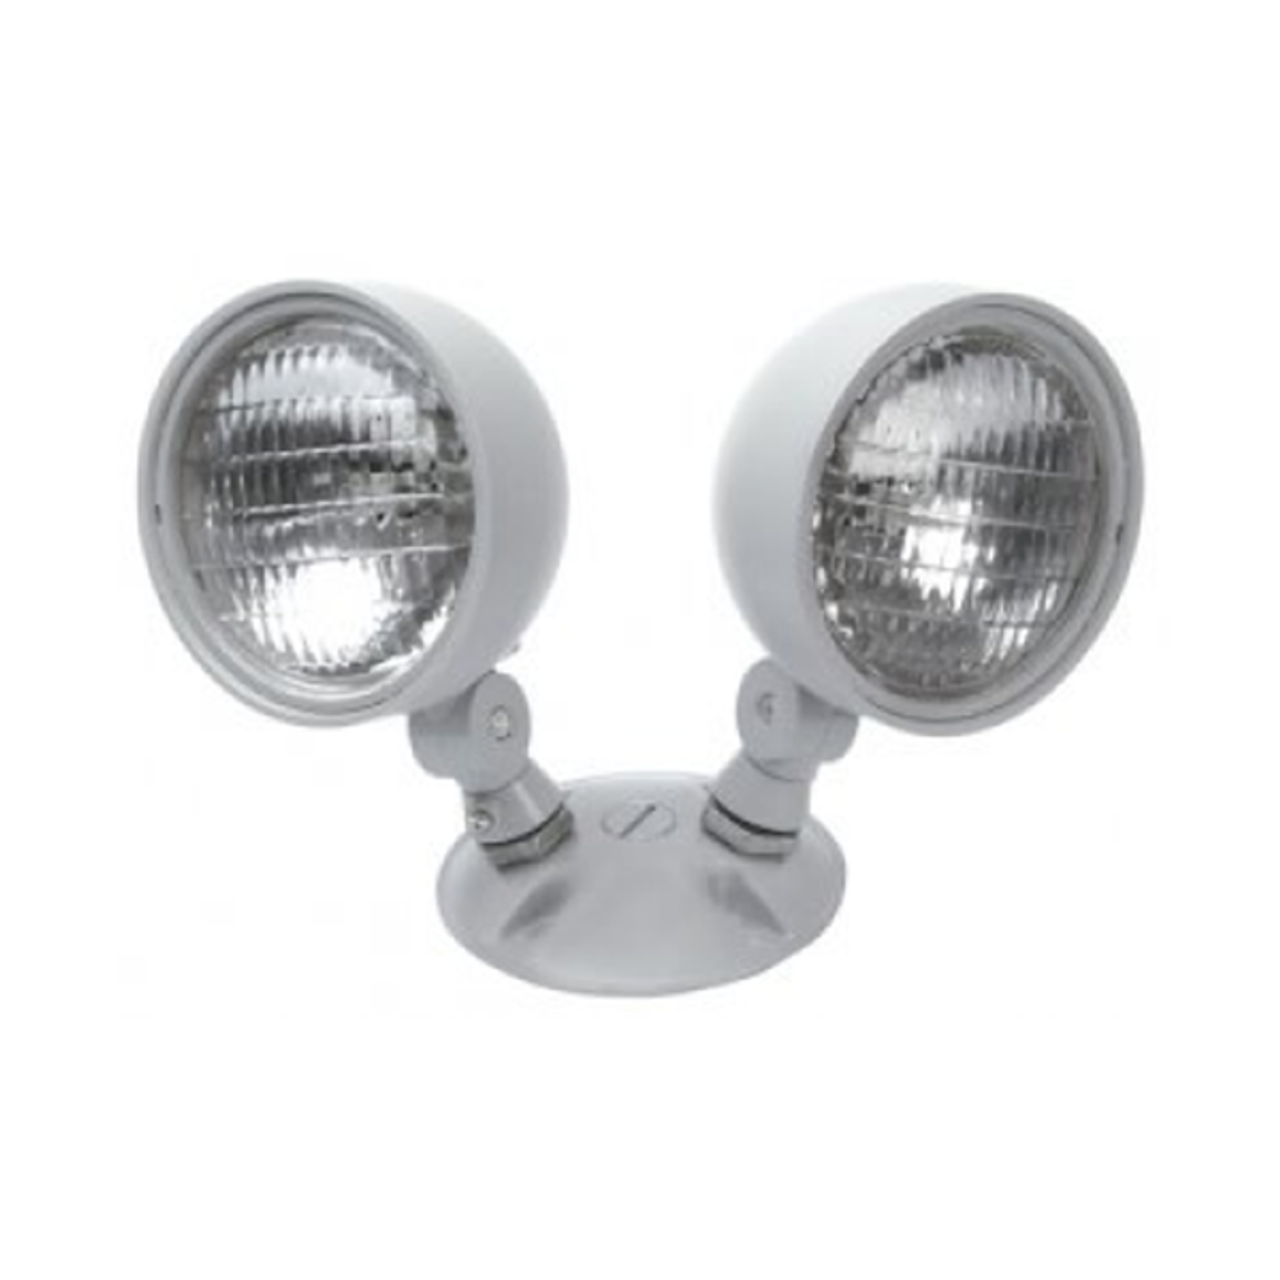 https://cdn11.bigcommerce.com/s-av4rzyboqm/images/stencil/1280x1280/products/2362/3991/outdoor_incandescent_remote_emergency_light_head__62707.1626112271.png?c=1